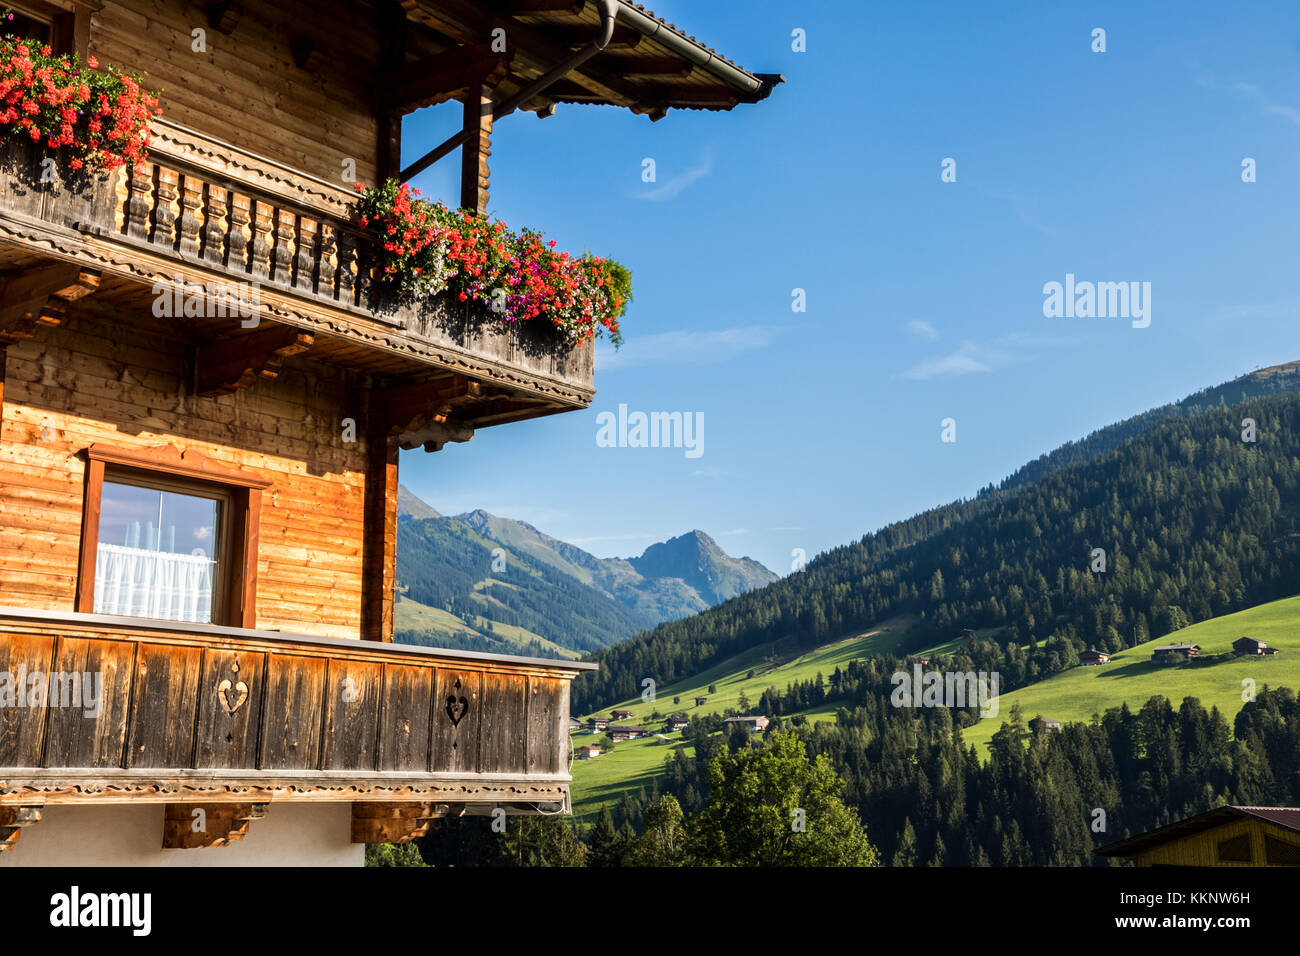 A typical wooden balcony with flowers in Alpbach, a town in western Austria in the state of Tyrol Stock Photo